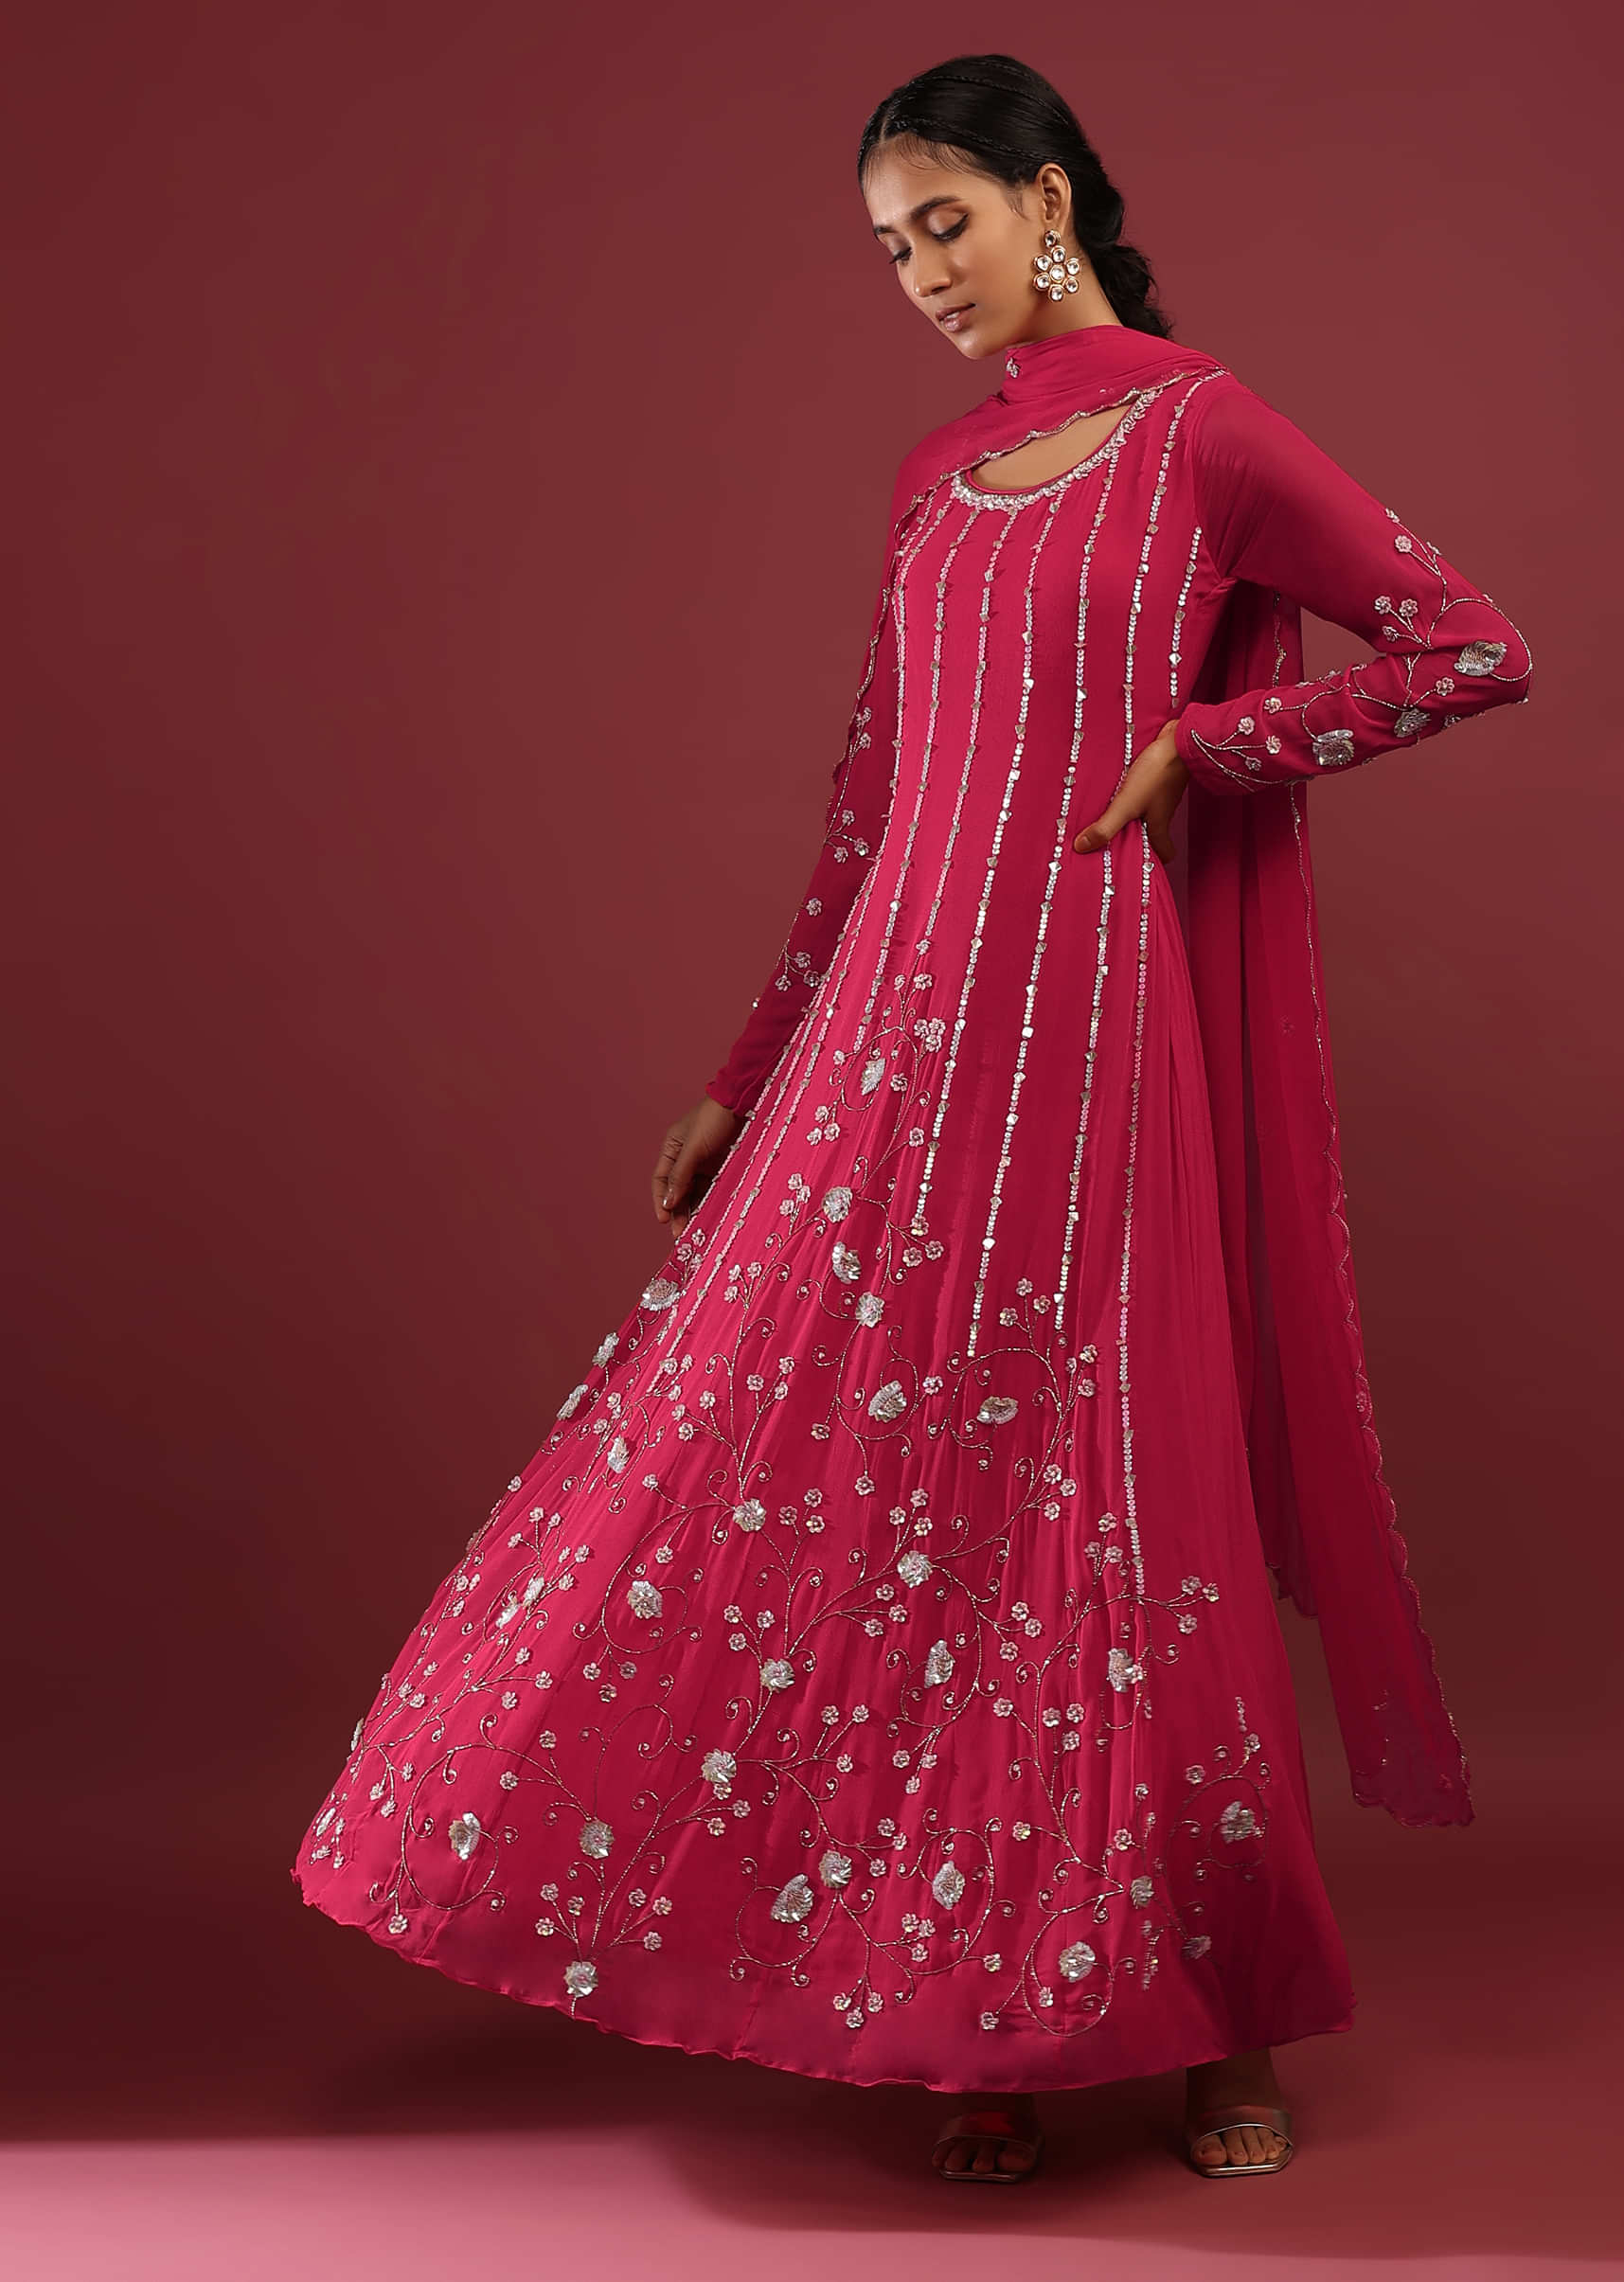 Hot Pink Anarkali Suit In Georgette With Multicolored Sequins Embroidered Stripes And Floral Design